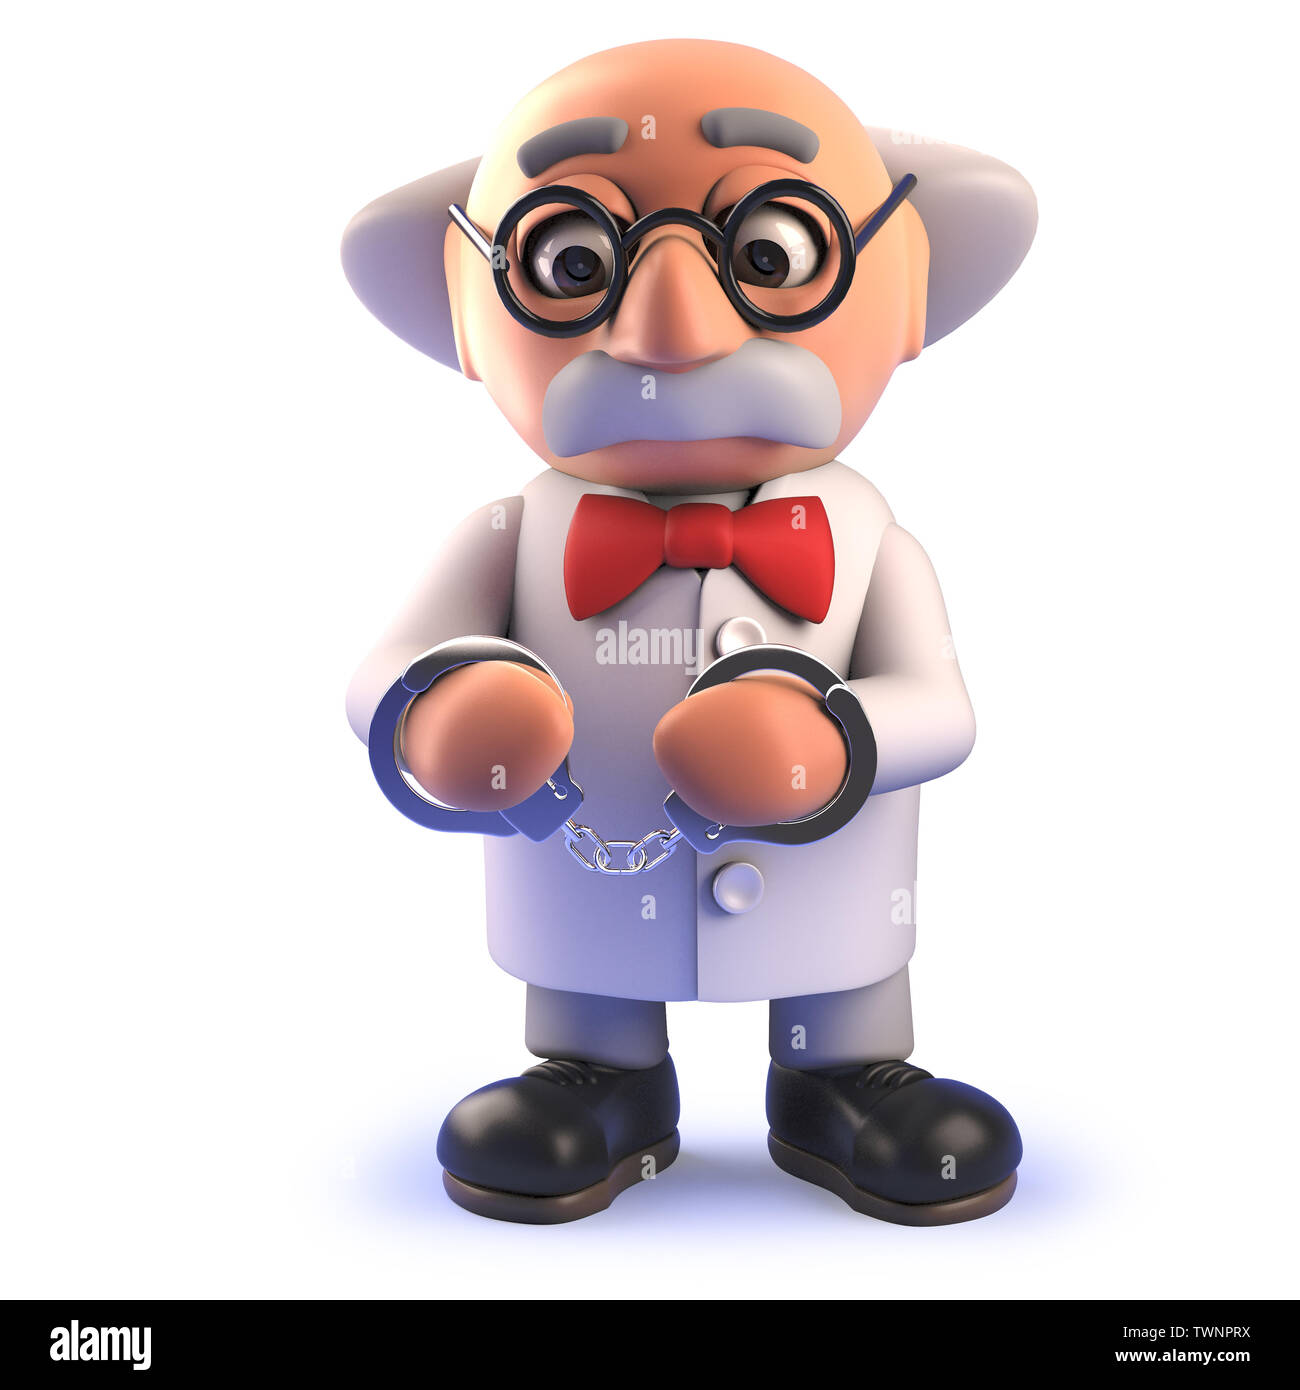 Rendered 3d image of a cartoon 3d funny mad scientist character wearing handcuff restraints Stock Photo